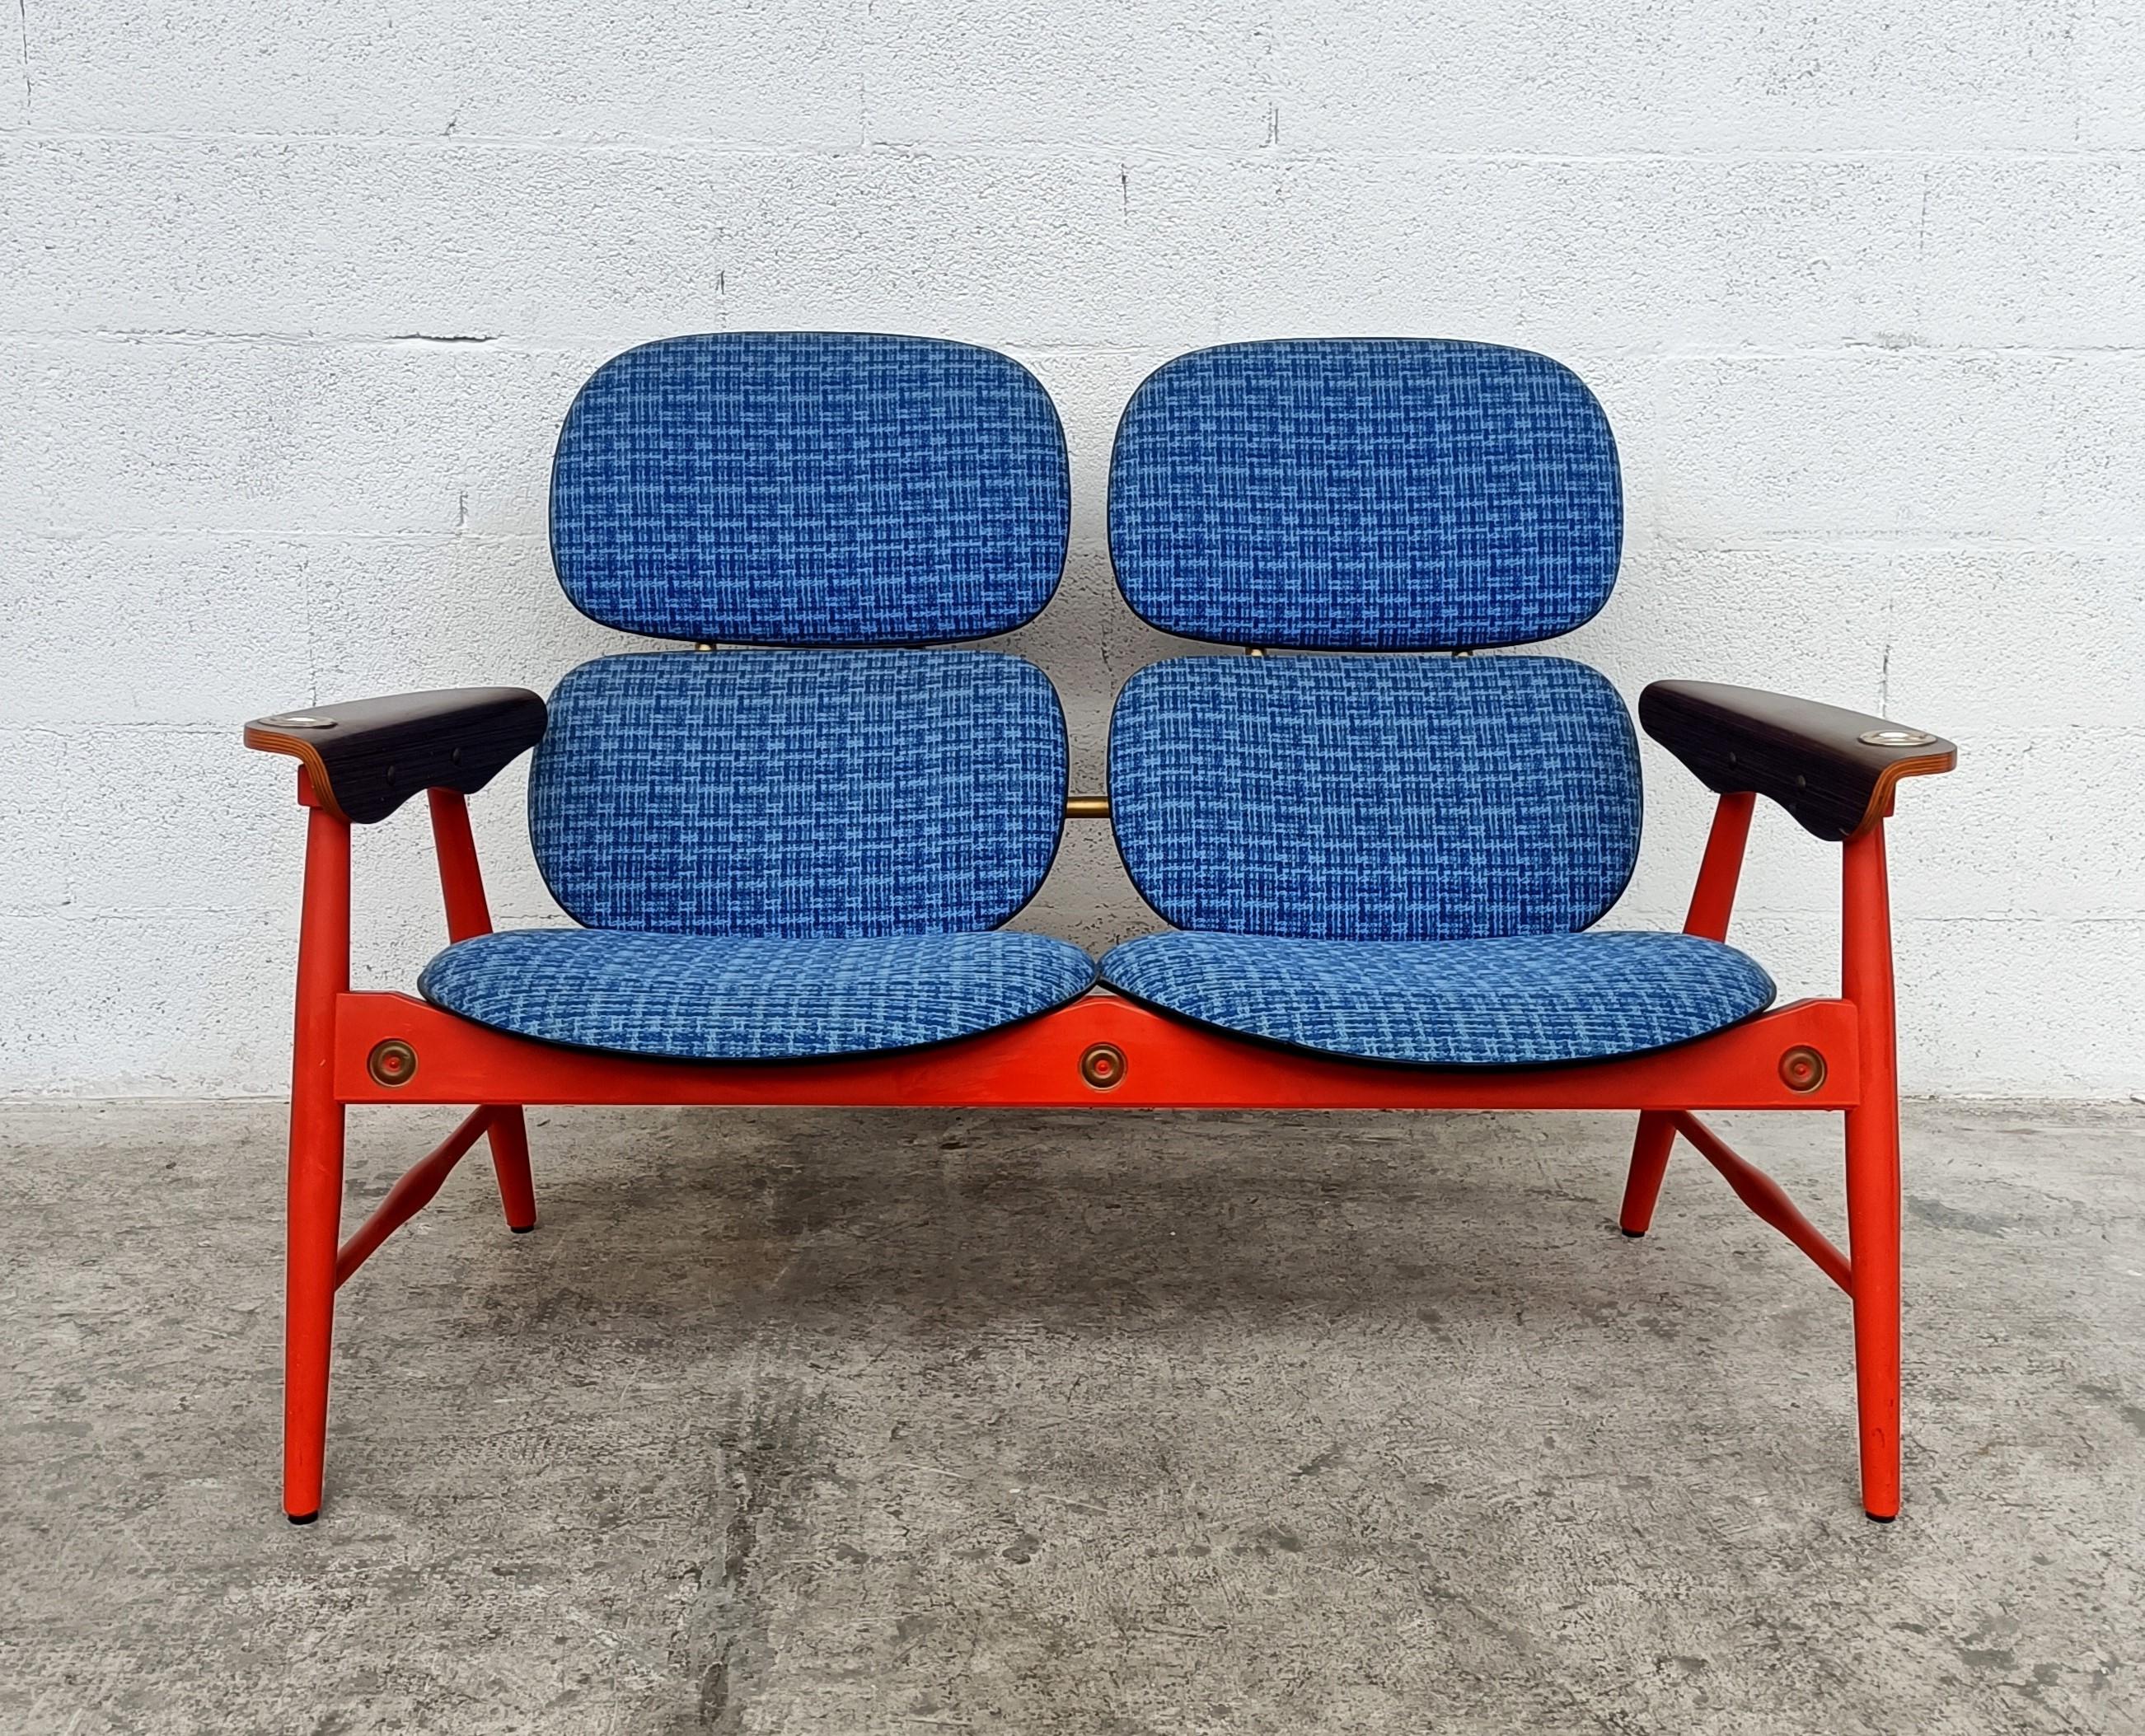 Italian Living Room Set, Armchairs, Loveaseat Table by Marco Zanuso for Poltronova 60s For Sale